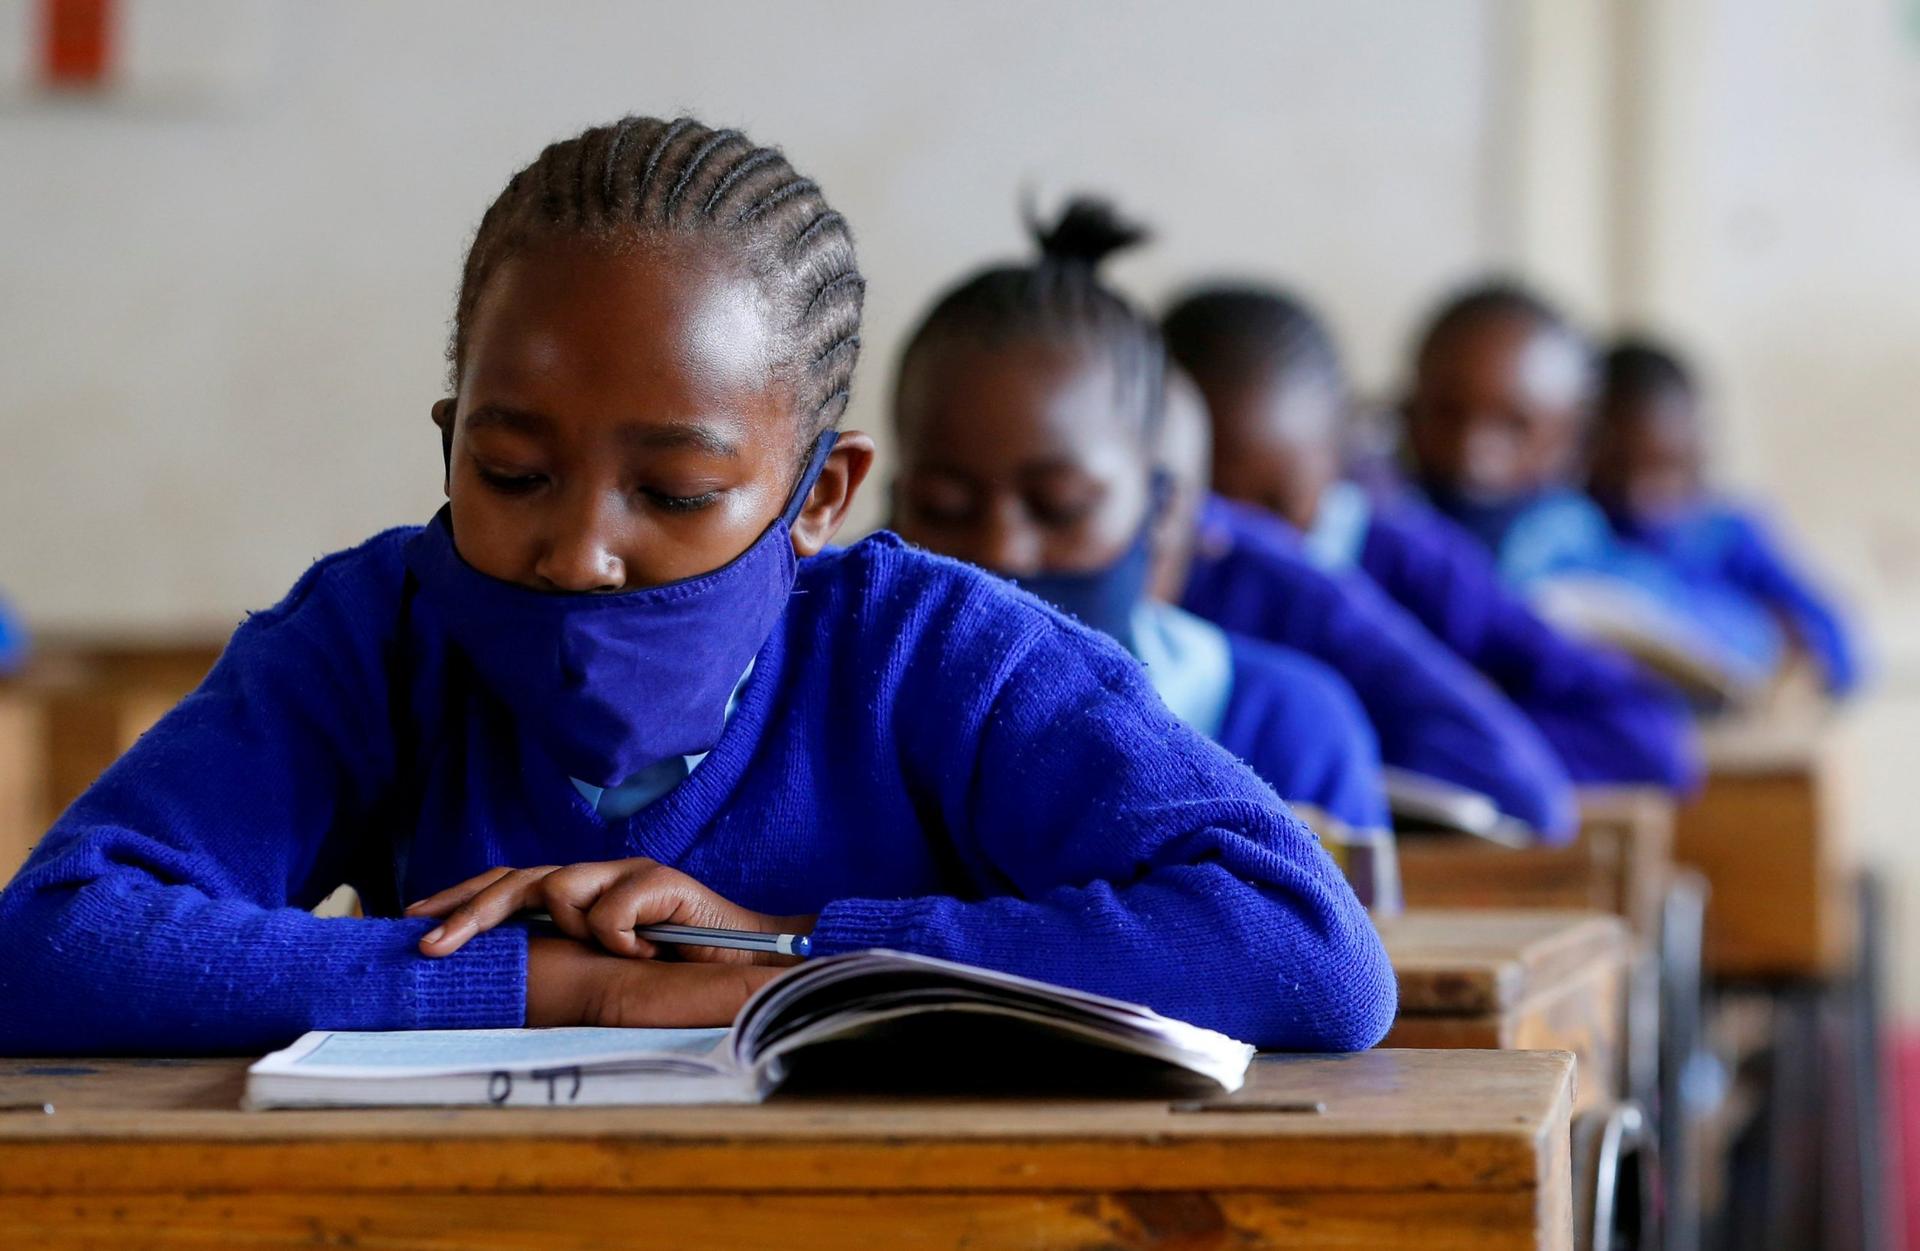 Kenya’s spotty internet service frustrates students as learning goes online